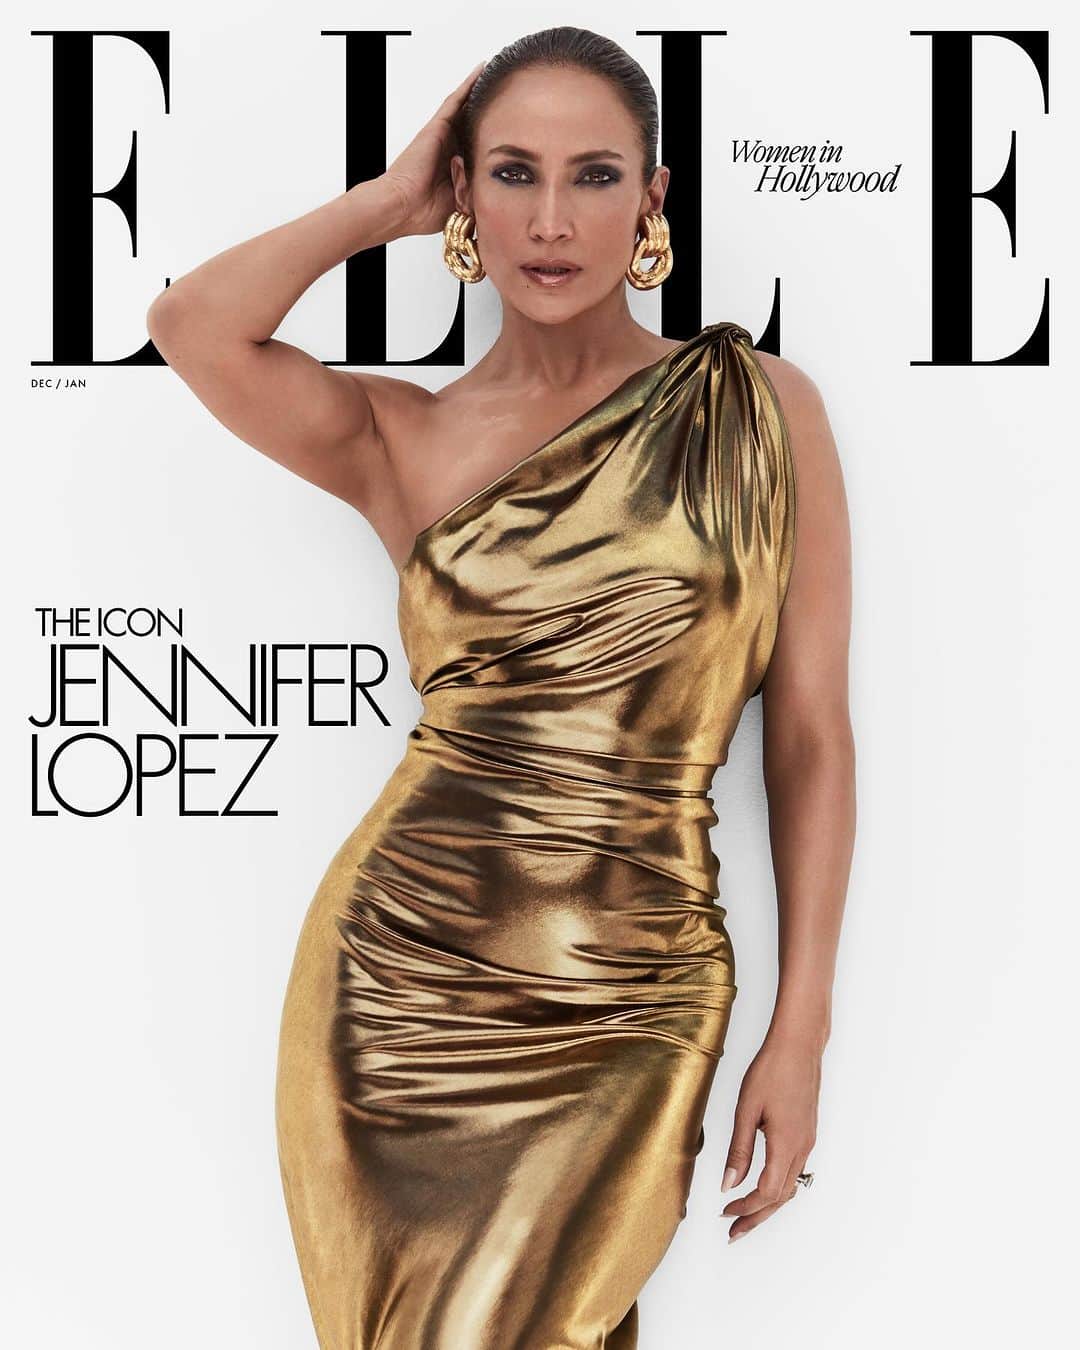 ELLE Magazineさんのインスタグラム写真 - (ELLE MagazineInstagram)「ELLE’s Women in Hollywood are pushing boundaries. This year’s Icon award winner #JenniferLopez is out to "tell the gamut of stories" with Nuyorican Productions. #TheColorPurple’s #DanielleBrooks sees her success as being not only for herself, but for a larger collective. “That’s what I signed up for as an actor—to be a reflection of the world that I actually live in, to represent the person who doesn’t feel she has a voice and who isn’t seen,” she says. And after years of being passed over in favor of white colleagues, @ralphlauren Spotlight award recipient #GretaLee is making up for lost time. “I want the same chance as everyone else. That’s what inclusion is.”  Meet the 2023 #ELLEWIH at the link in bio. –  Our editors worked directly with the Screen Actors Guild during its recent strike to make sure we could honor women in Hollywood while still adhering to union guidelines.  ELLE: @elleusa Editor-in-Chief: Nina Garcia @ninagarcia Talent: Jennifer Lopez, Danielle Brooks, Greta Lee @jlo @daniebb3 Photographer: Sølve Sundsbø,Adrienne Raquel,Zoey Grossman @solvesundsbostudio @adrienneraquel @zoeygrossman Stylist: George Cortina,Zerina Akers,Alex White @georgecortina @zerinaakers @alexwhiteedits Writer: Véronique Hyland, Erica Gonzales, Claire Stern @niquepeeks @ericagonzo @clairecstern Hair: Jesus Guerrero at The Wall Group, Nikki Nelms for SheaMoisture, Jenny Cho at A-Frame Agency @jesushair @thewallgroup @nikkinelms @sheamoisture @jennychohair @aframe_agency Makeup: Scott Barnes at Six K, Rebekah Aladdin for Dior, Kara Yoshimoto Bua for Chanel @scottbarnescosmetics @sixkla @rebekahaladdin @diorbeauty @karayoshimotobua @chanel.beauty Manicure: Tom Bachik for Tweezerman, Temeka Jackson at A-Frame Agency, Ashlie Johnson at The Wall Group @tombachik @tweezerman, @customtnails1 @aframe_agency @ashlie_johnson @thewallgroup Production: Dana Brockman at Viewfinders, Anthony Federici at Petty Cash Production, Lola Production @dbrock324 @viewfindersnyla @thesaintsalome @petty_cash_production @lolaproduction Set design: Din Morris, Bryan Porter at Owl and the Elephant @din_morris  Set: Kelly Infield @kellys_phone On location: The Hollywood Roosevelt @thehollywoodroosevelt」11月30日 22時00分 - elleusa